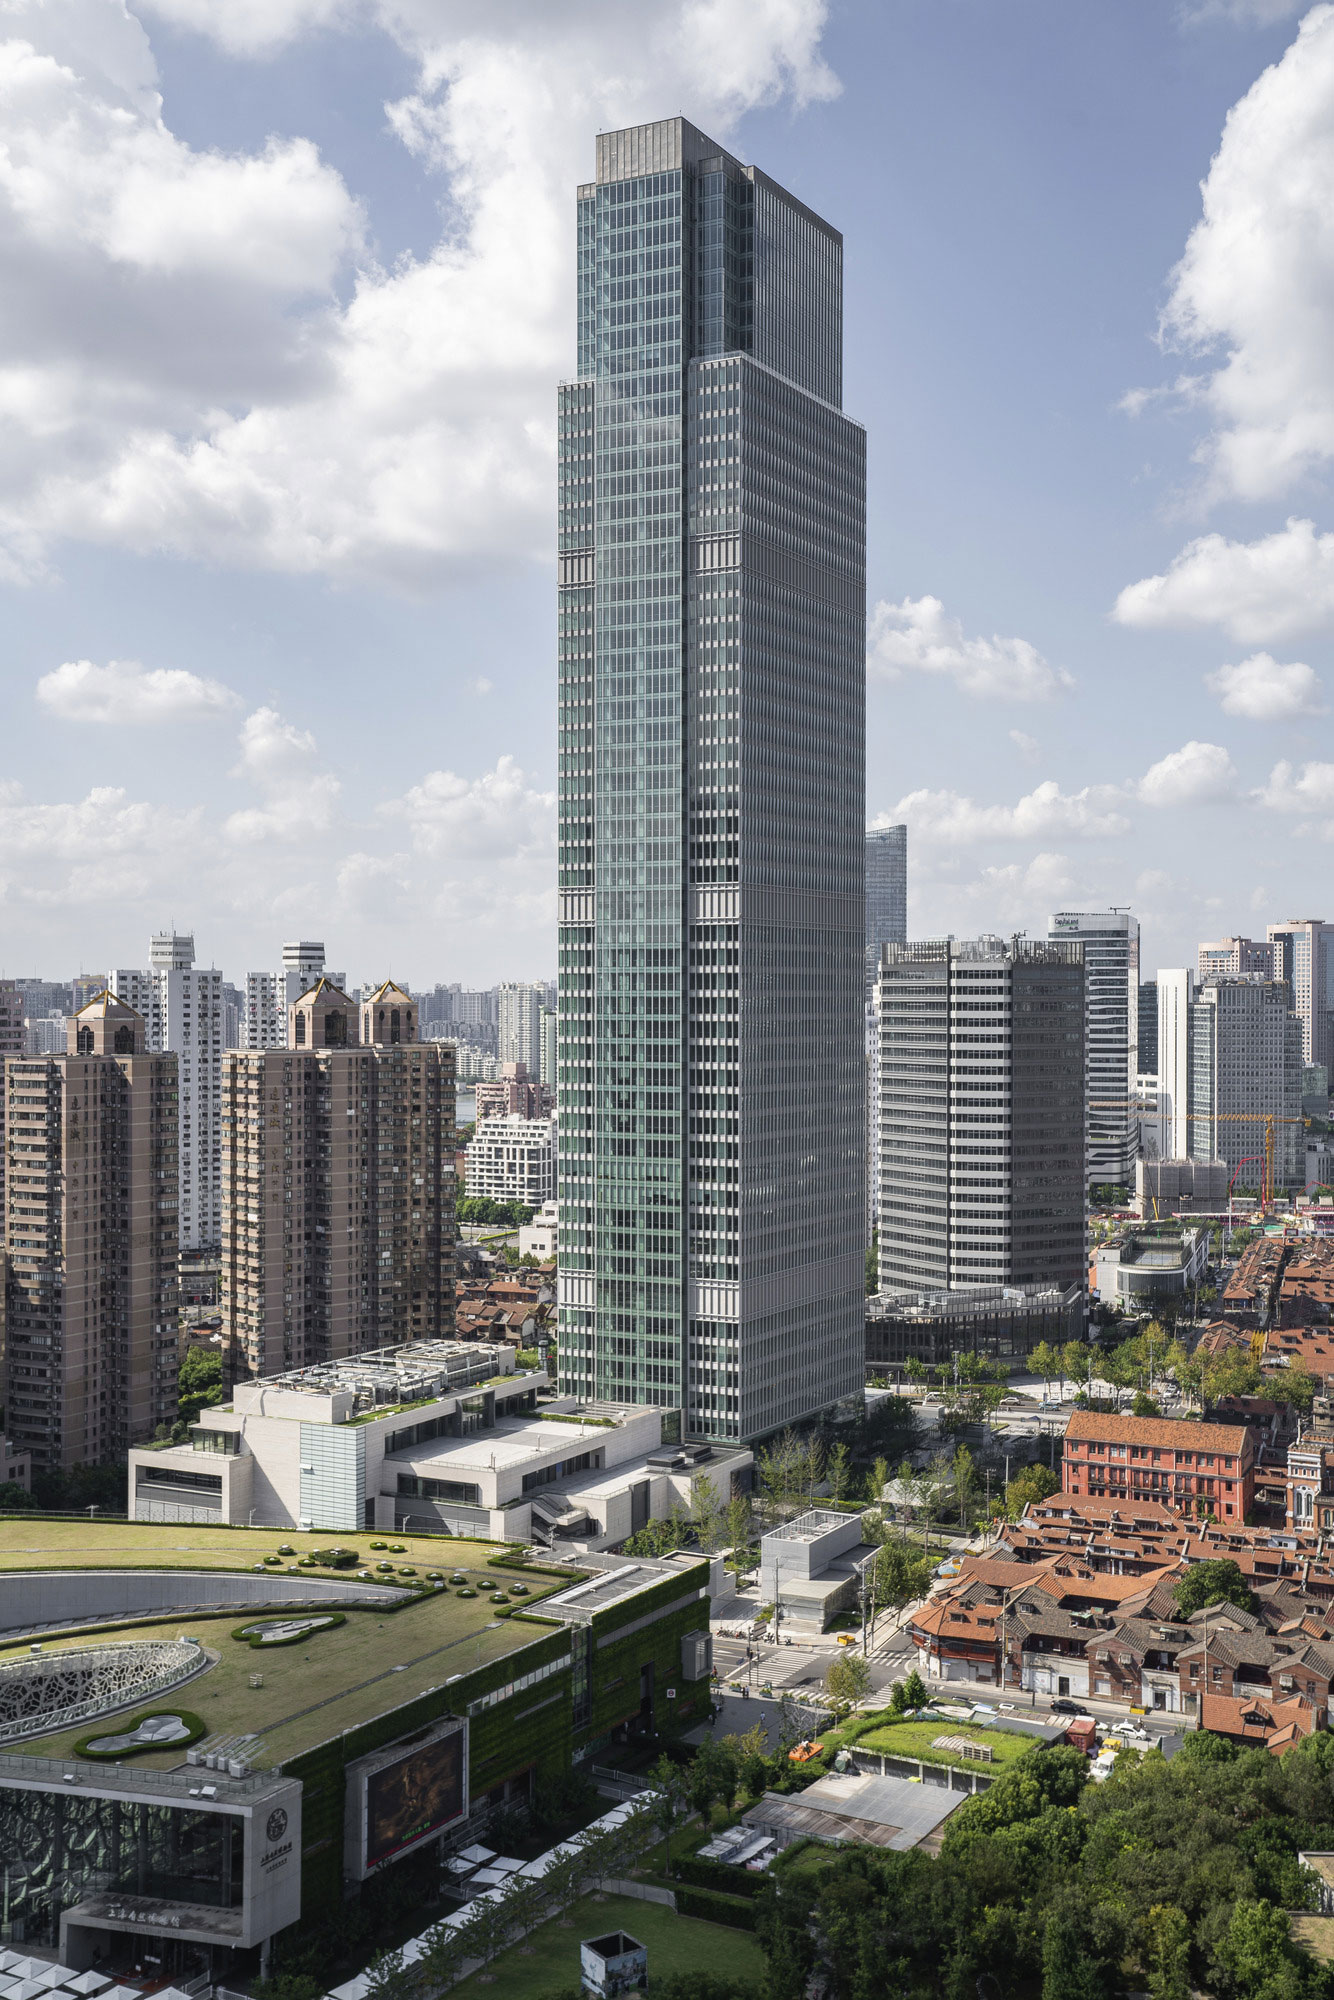 A high-rise glass office tower overlooking the Shanghai Natural History Museum and Jing'an Sculpture Park